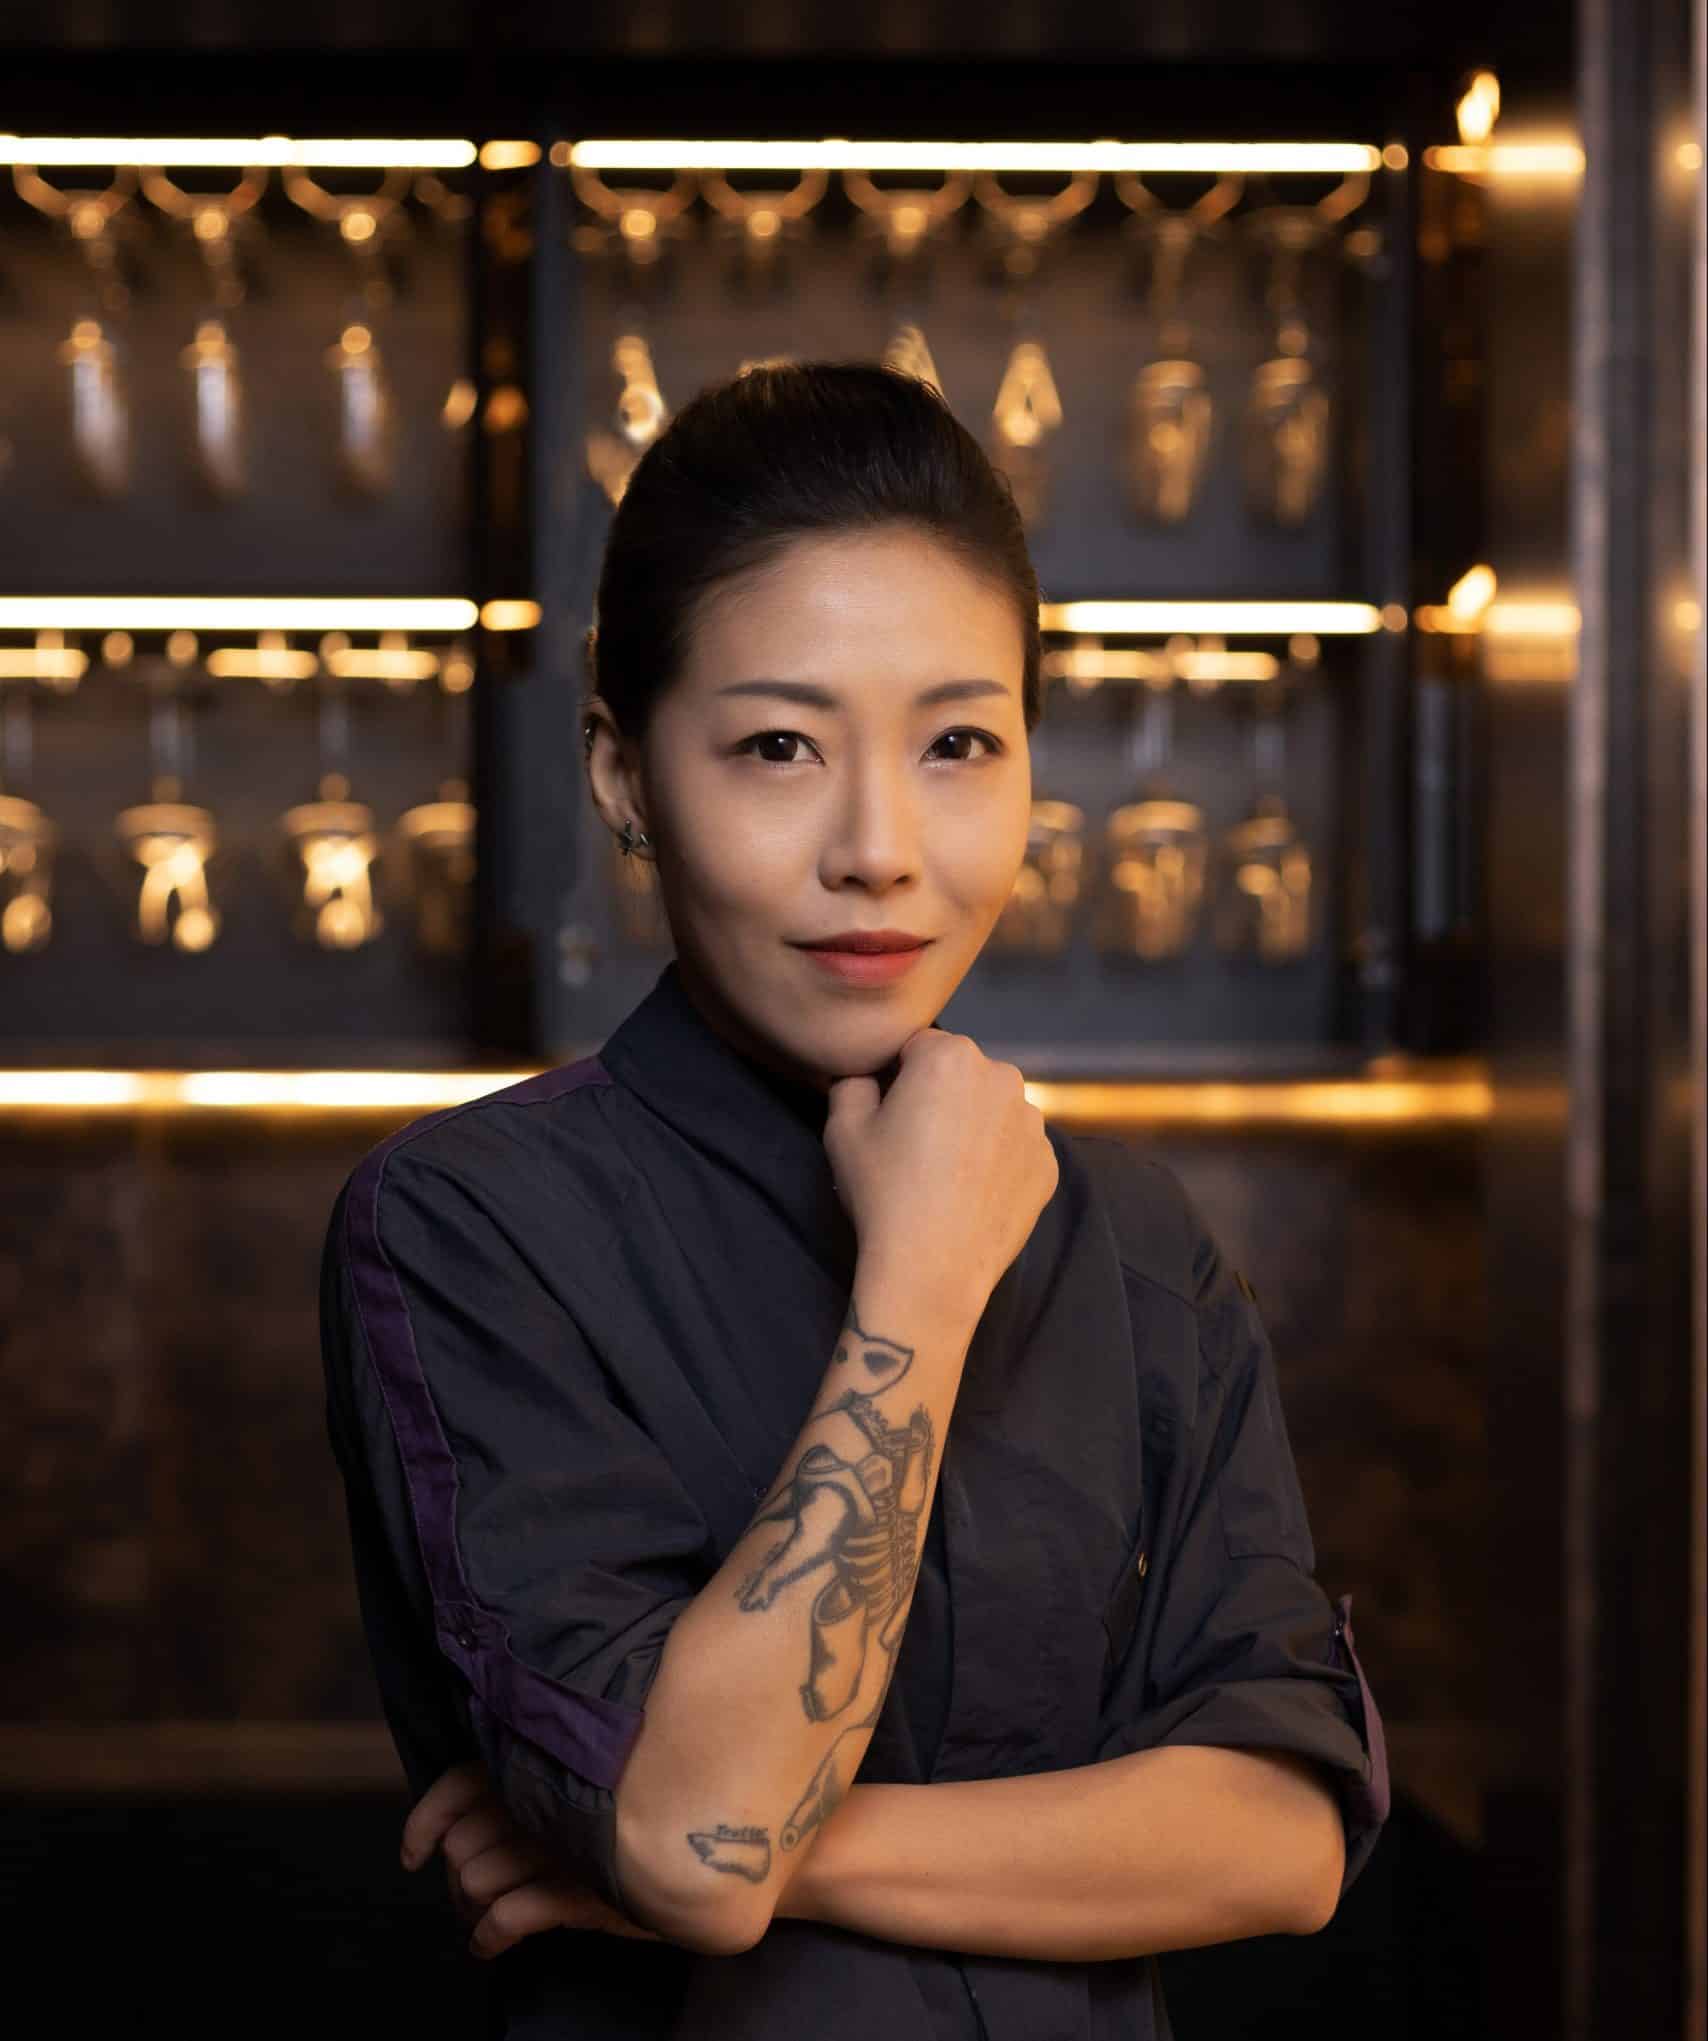 Asias-Best-Female-Chef-PR-image_William-Reed-Business-Media-scaled-e1614246291890